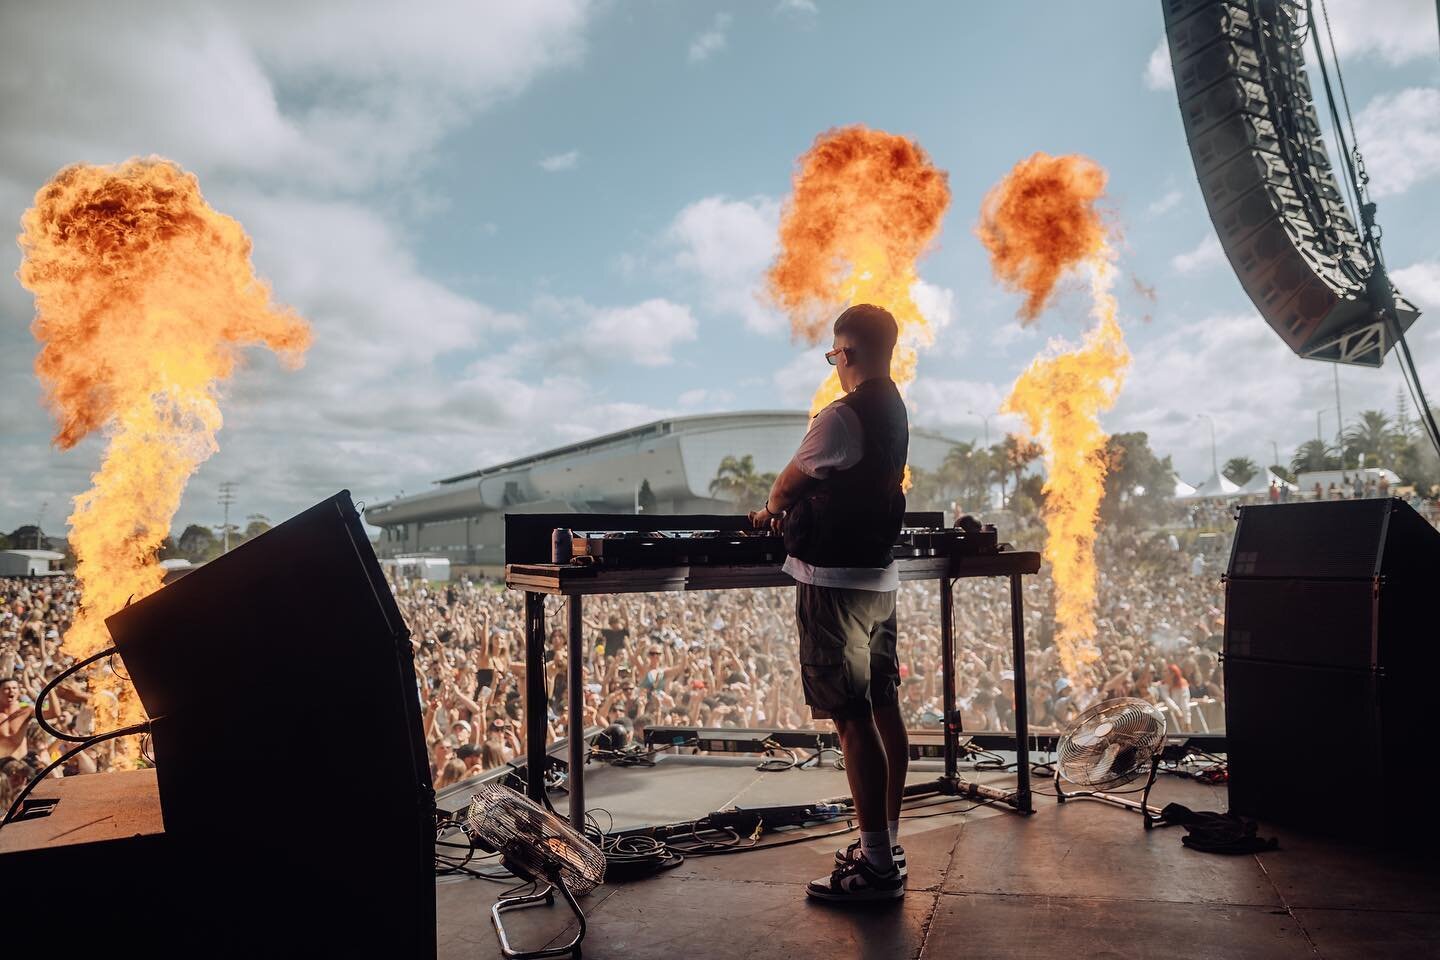 Not even close to a having a Euro summer this year so here is @kmotionzuk at @goldenlightsnz in peak NZ summer, close enough right? 🥴☀️ with @radlab_ 
-
-
-
#nzsummer #festivalphotography #photoshoot #live #concert #festival #livemusic  #concertphot